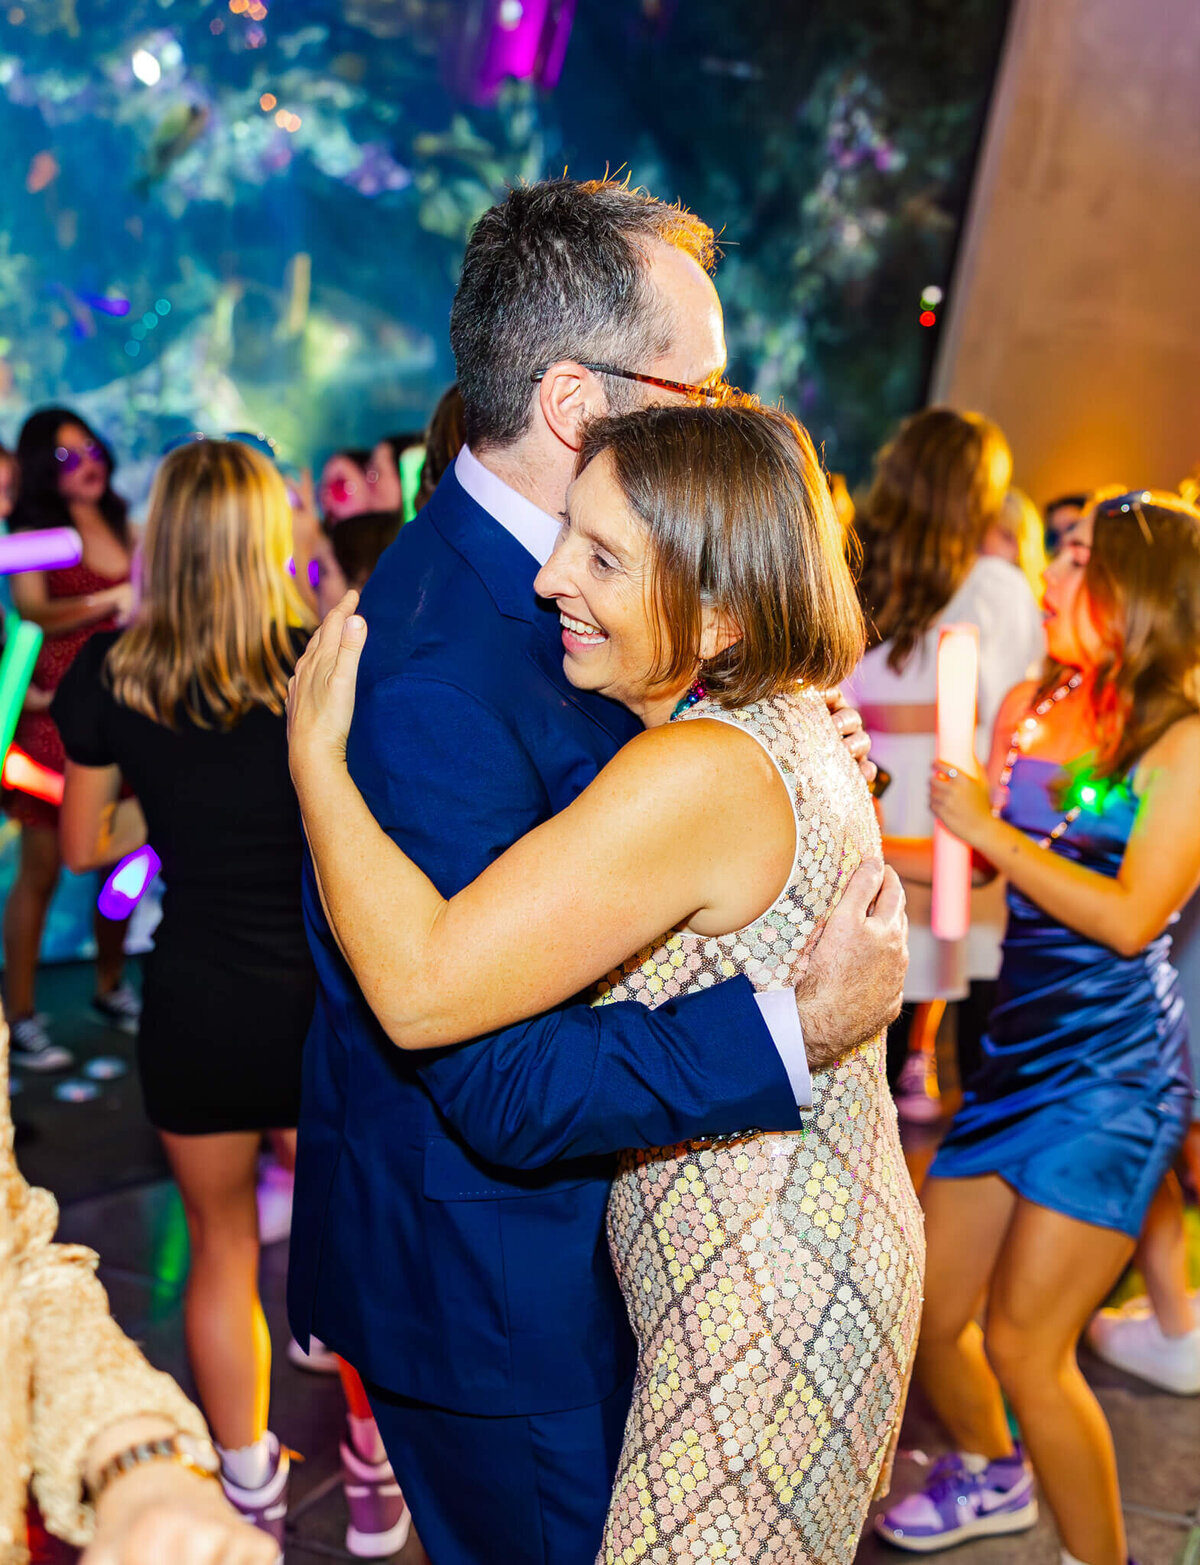 Happy parents dance on the dance floor in a blue suit and gold dress